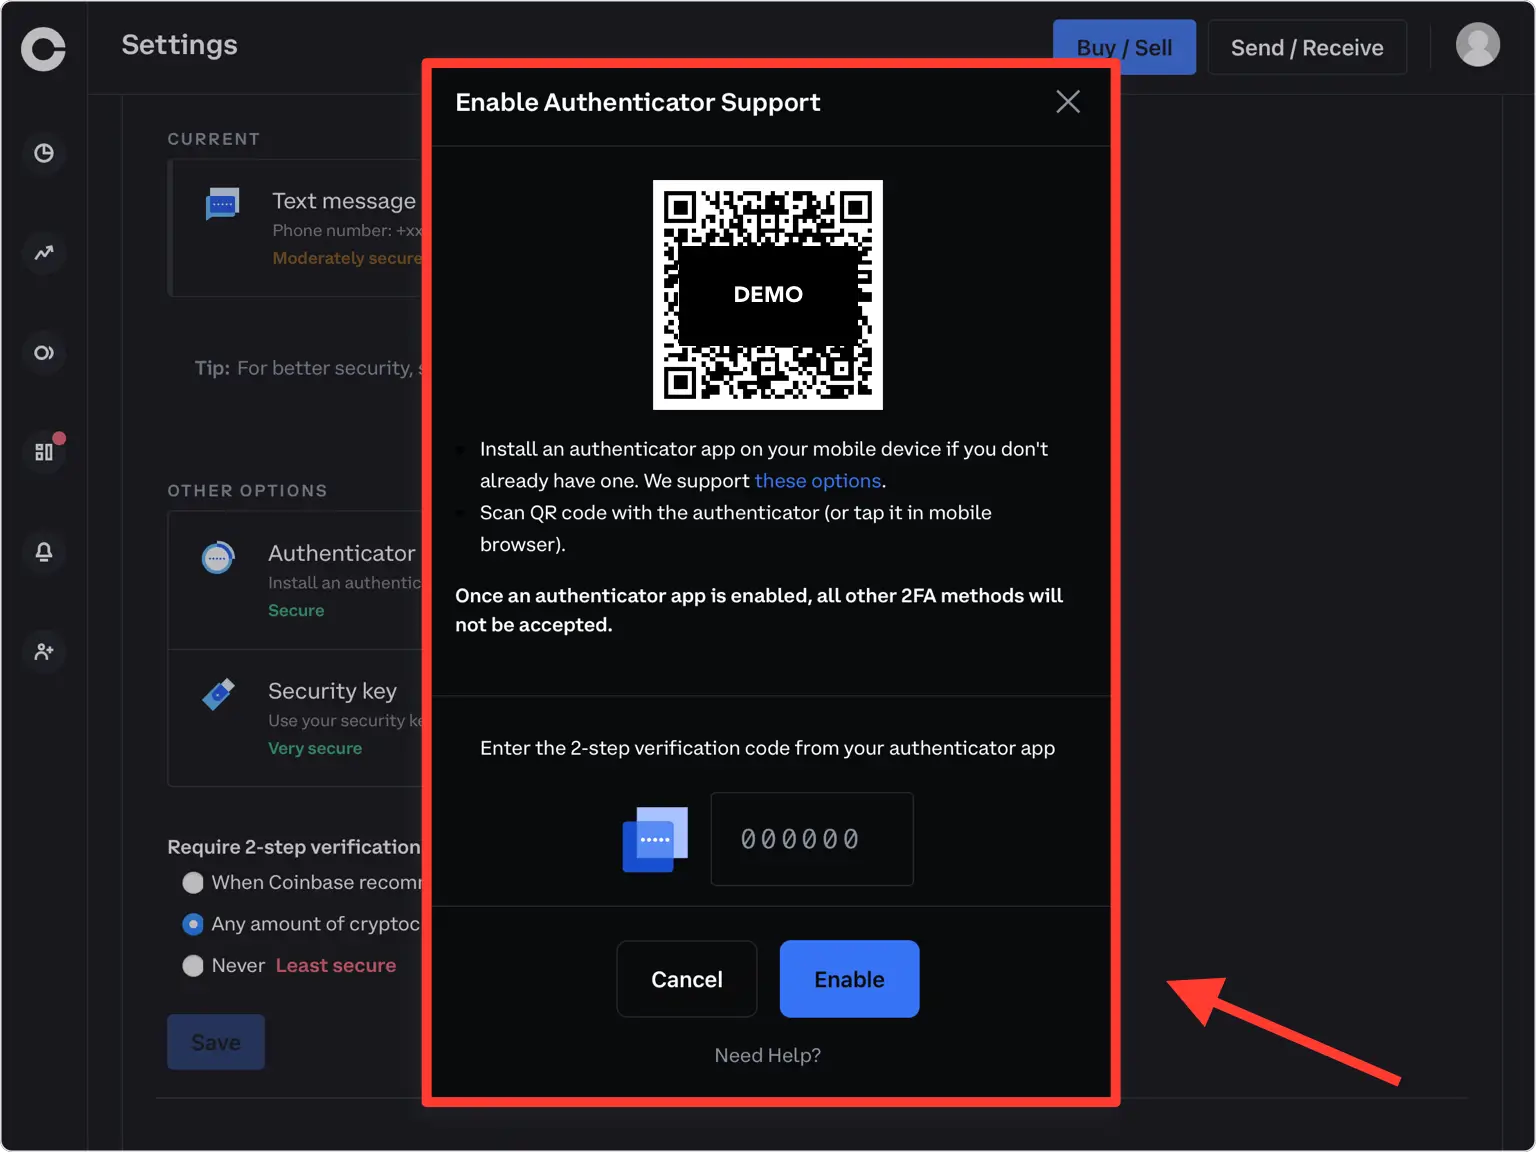 2 factor authentication on google - Storing crypto - Moralis Academy Forum